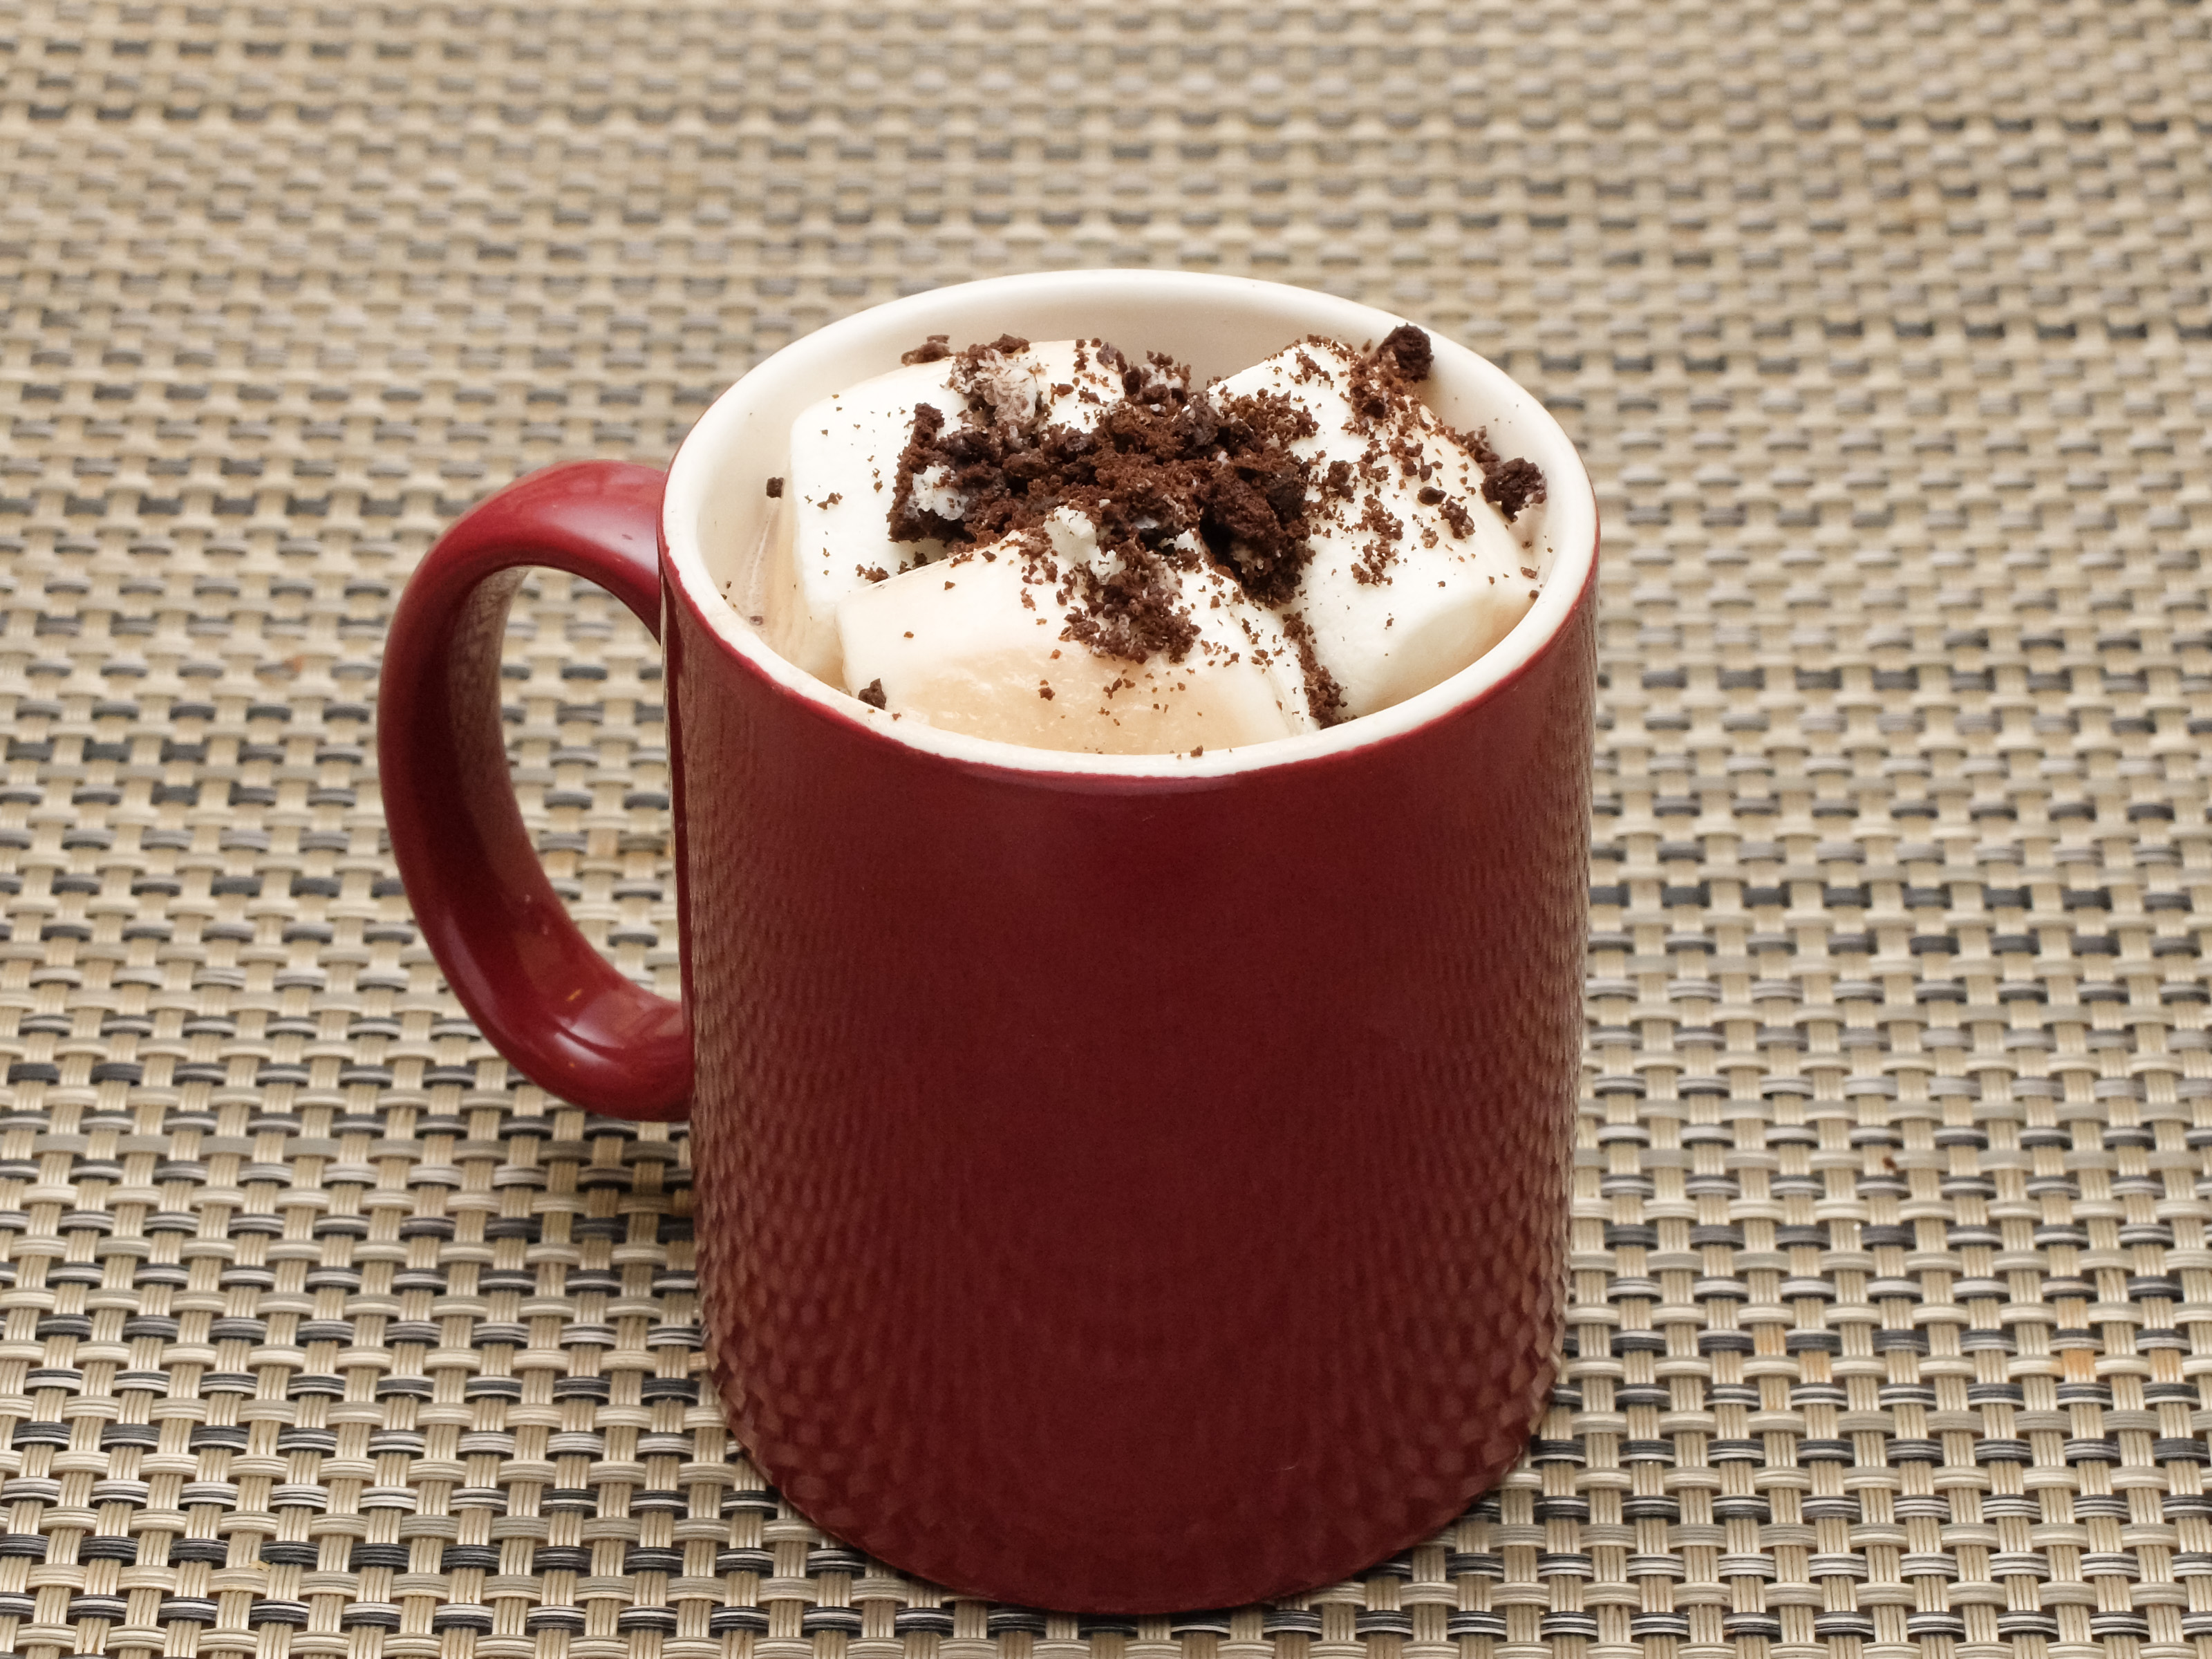 How to Make Oreo Hot Chocolate: 12 Steps (with Pictures) - wikiHow